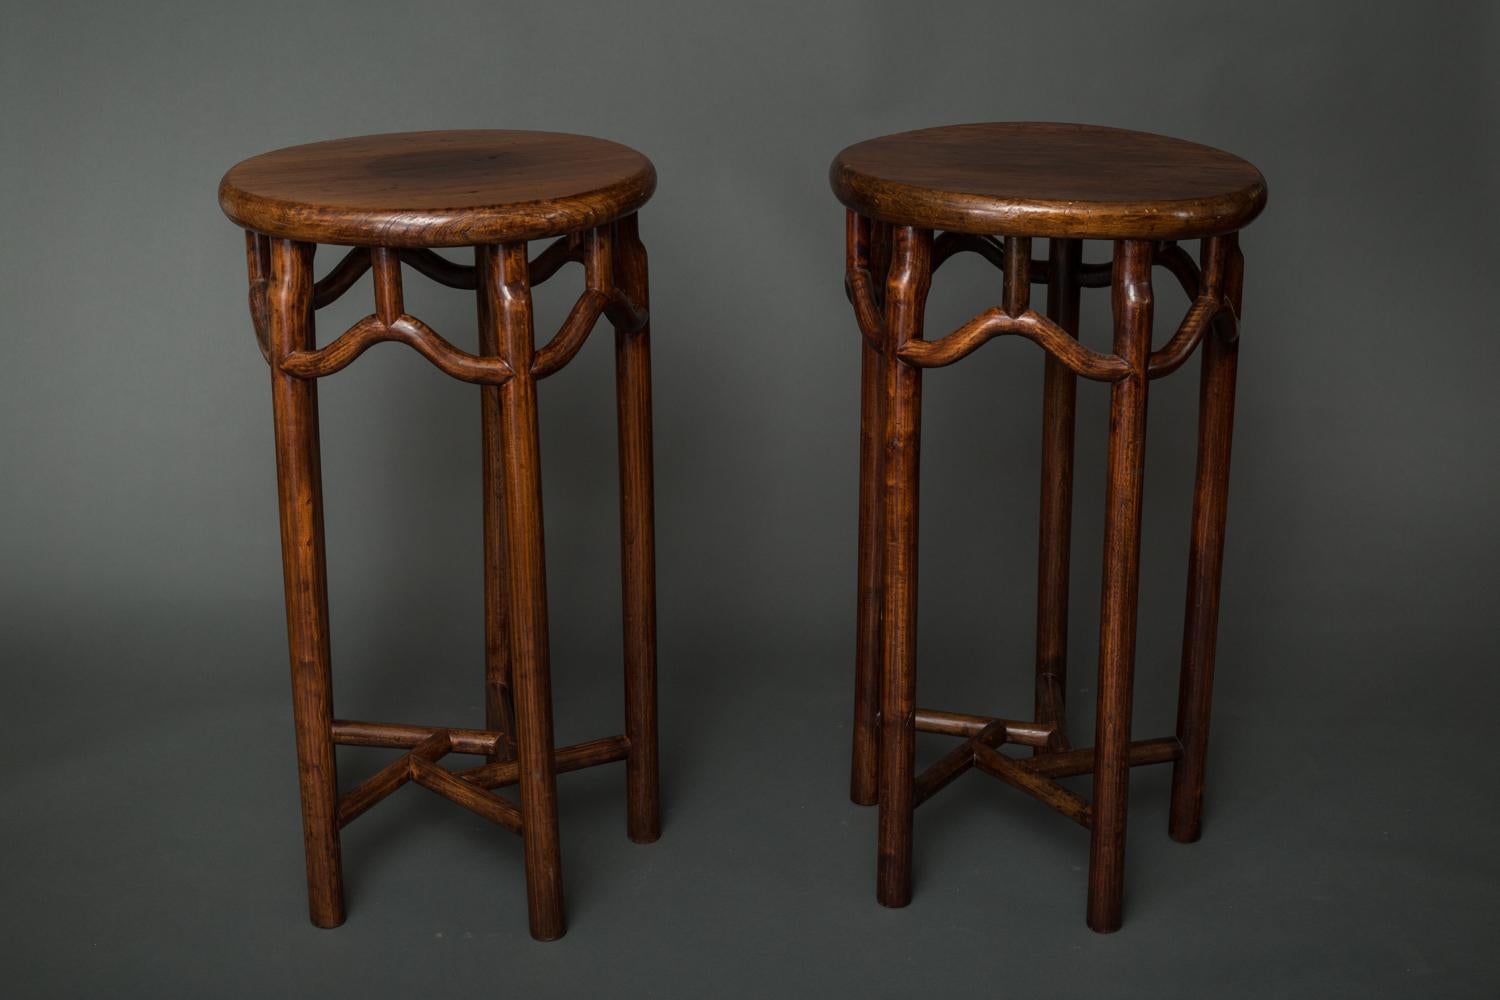 A pair of round pedestals made of elm wood with a beautiful, old patina. 